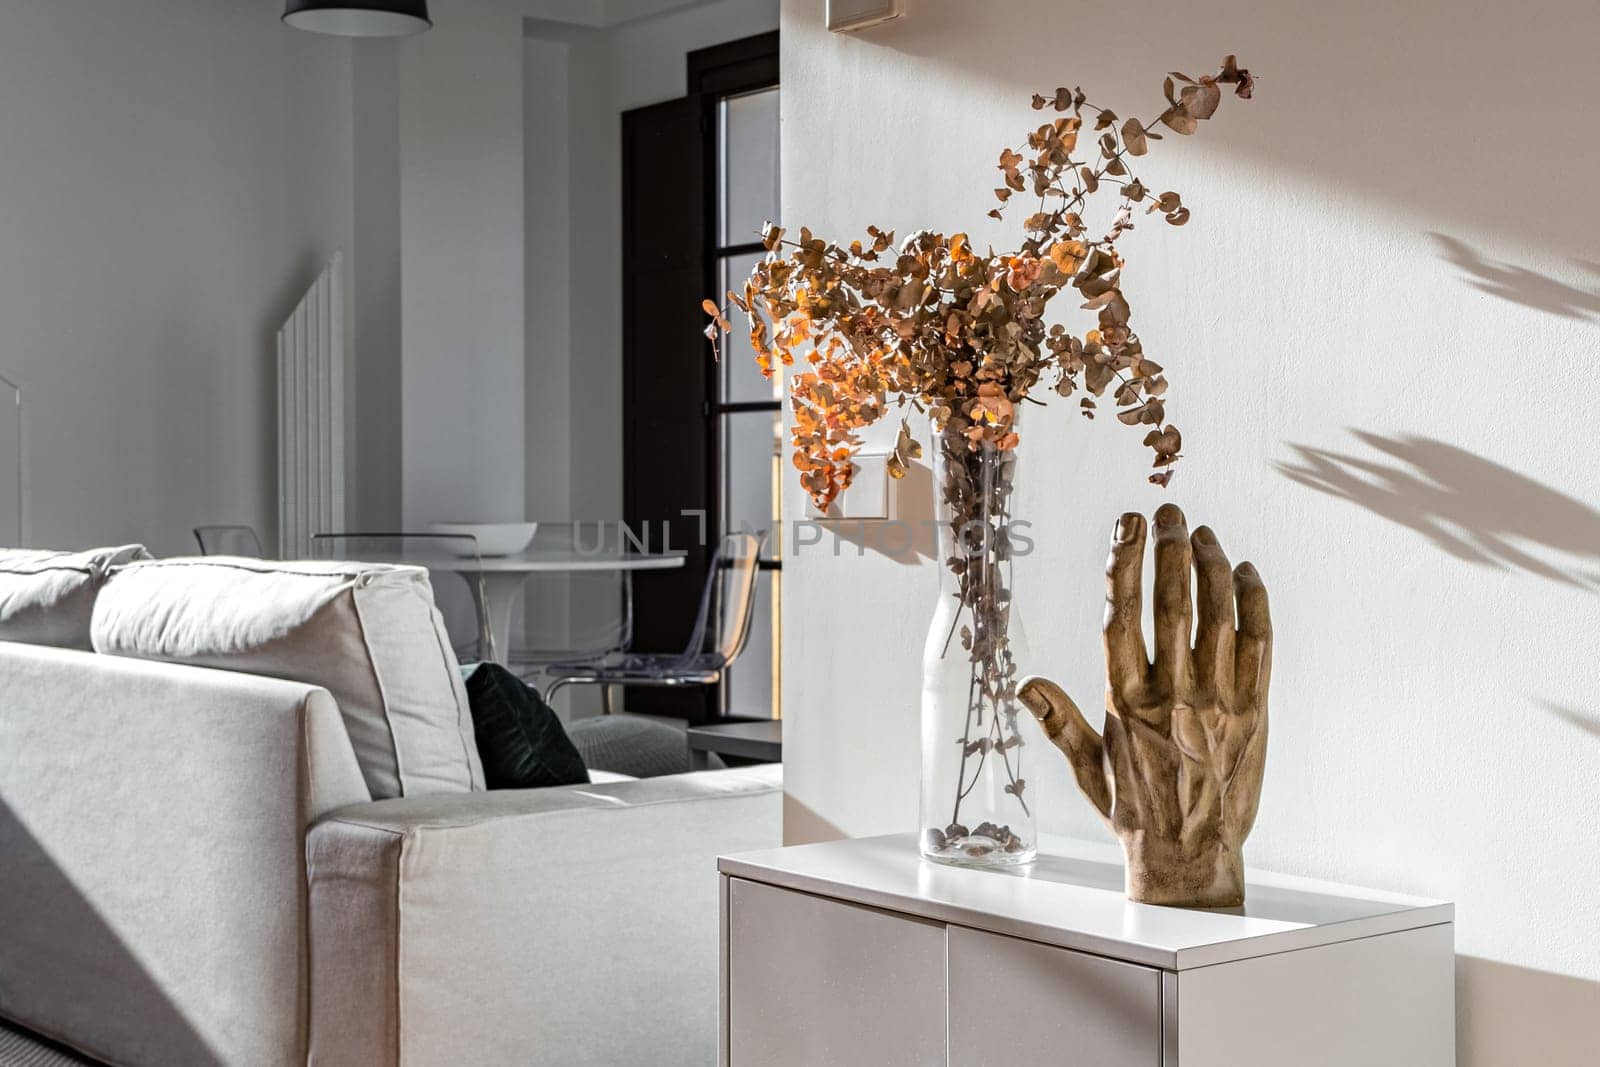 Decorative hand sculpture and vase with flowers on small white cupboard in sunny interior of modern apartment.